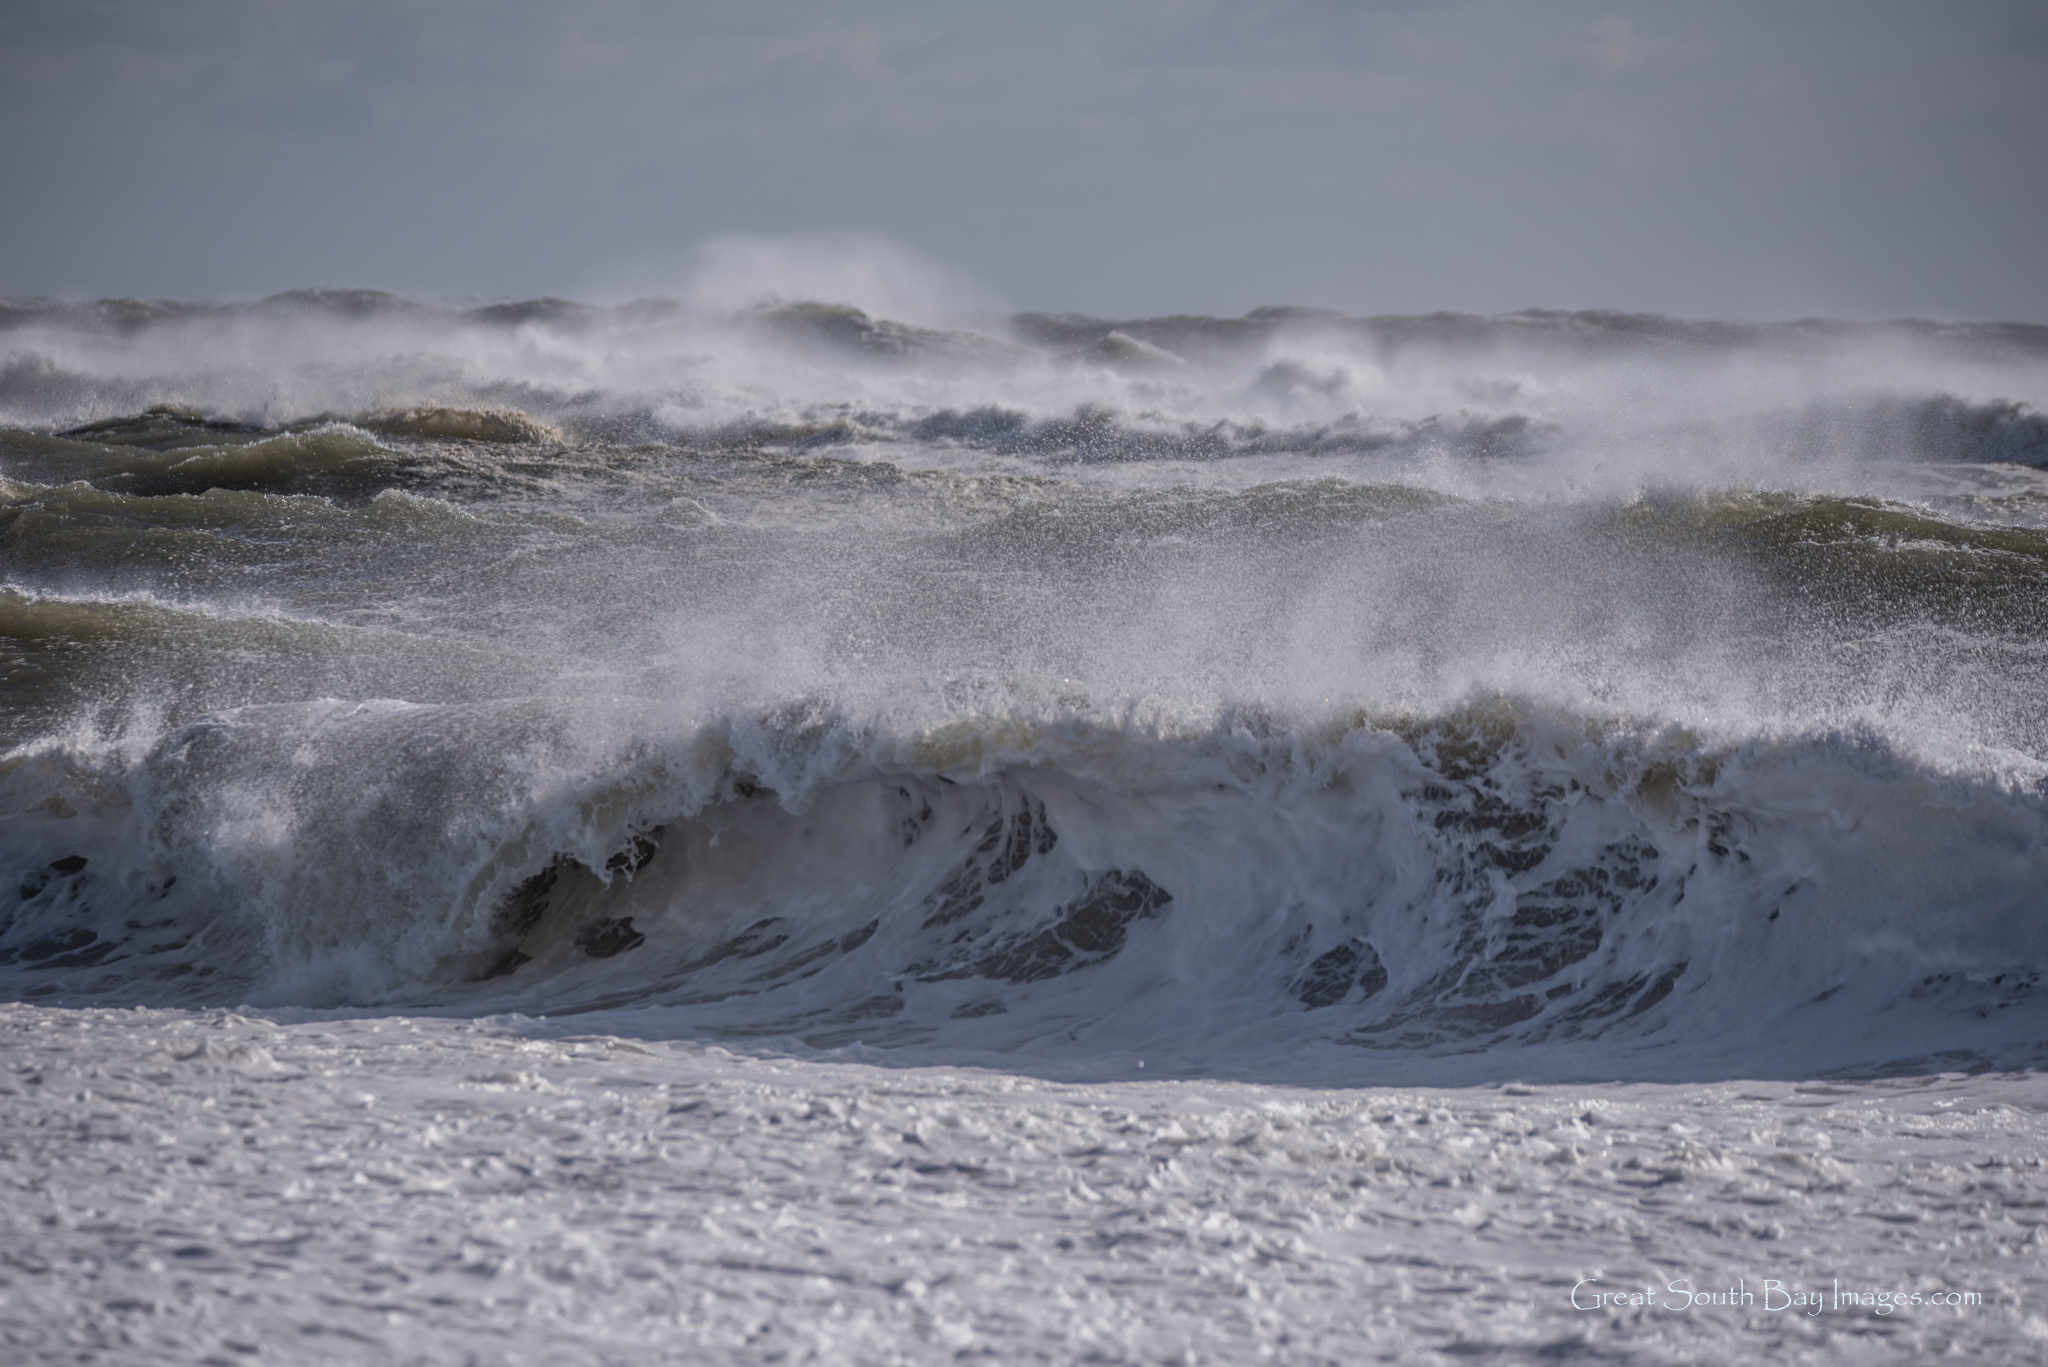 Video and Images: Storm Surf on Fire Island - Fire Island and Beyond